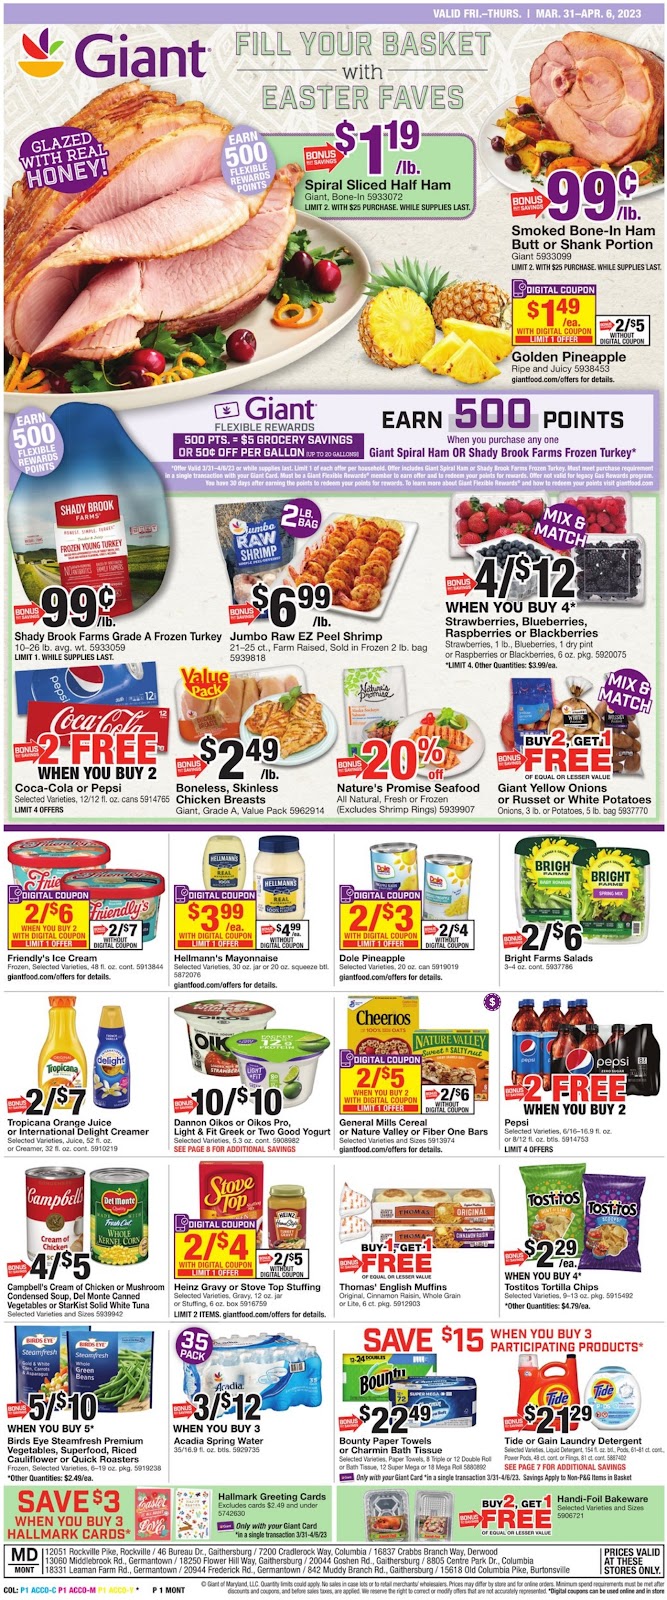 Giant Weekly Ad - 1